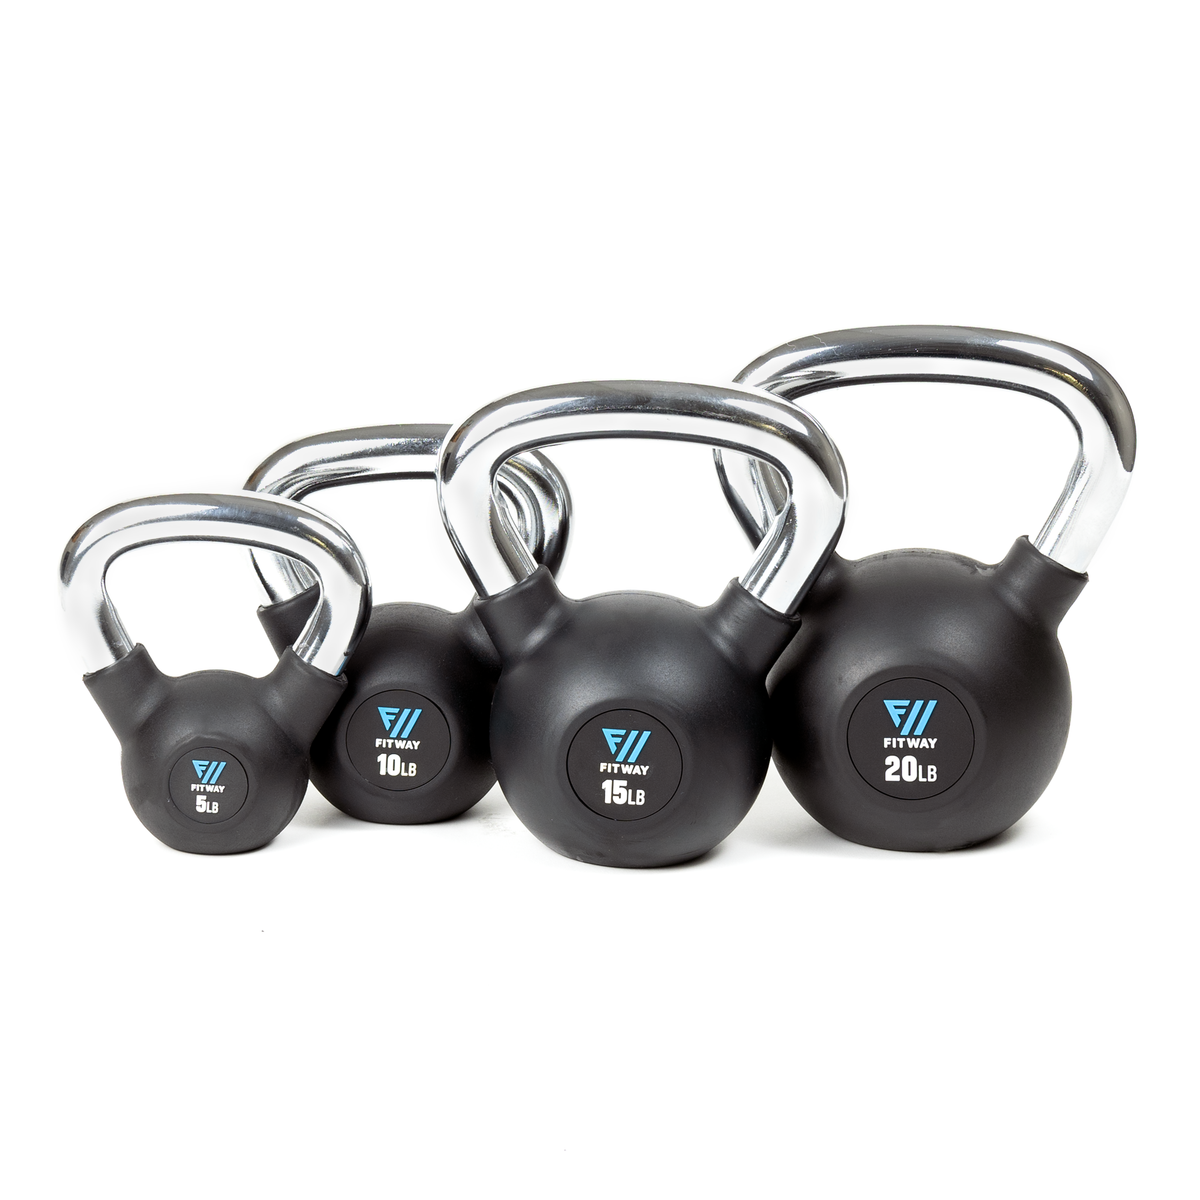 FitWay Equip. Rubber Coated 10lb Kettlebell